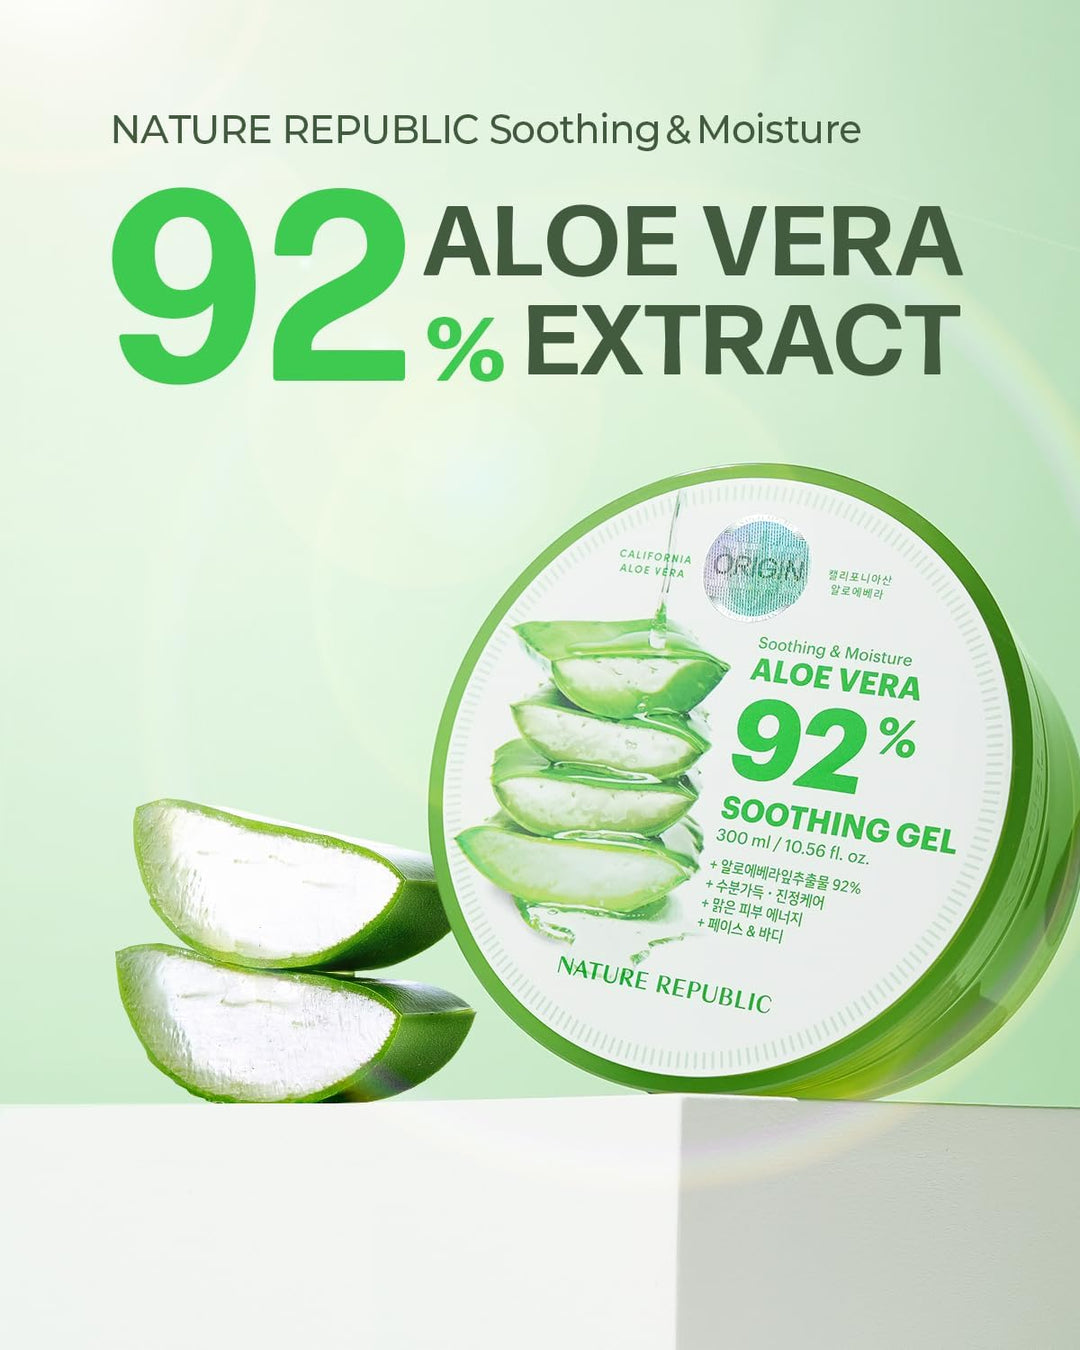 NATURE REPUBLIC Aloe Vera 92-Percent Soothing Gel 300ml (NEW PACKAGE)Health & Beauty